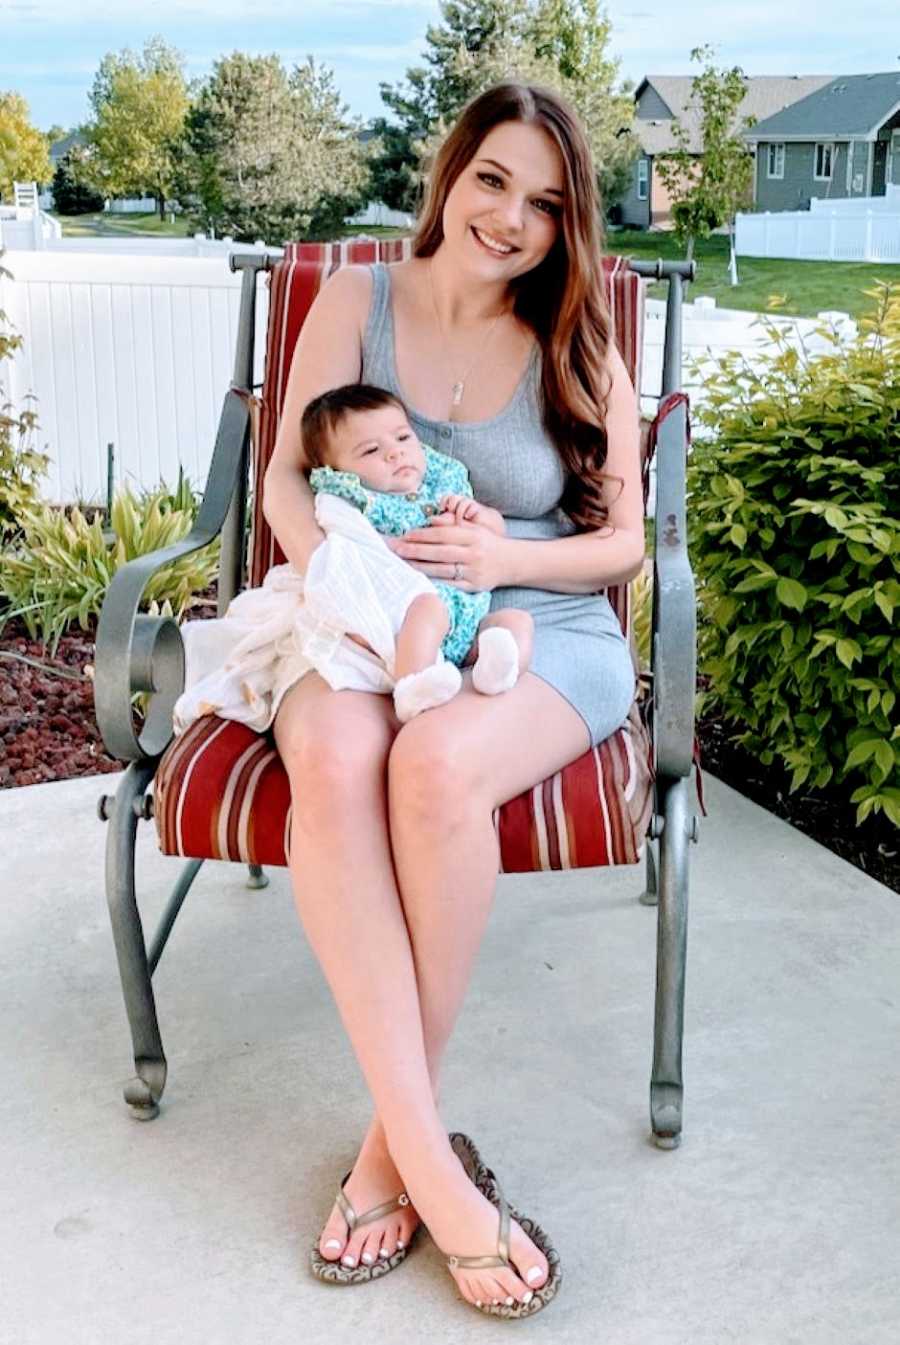 Stay at home mom sits with newborn daughter on her front porch after winning her battle with rare HG